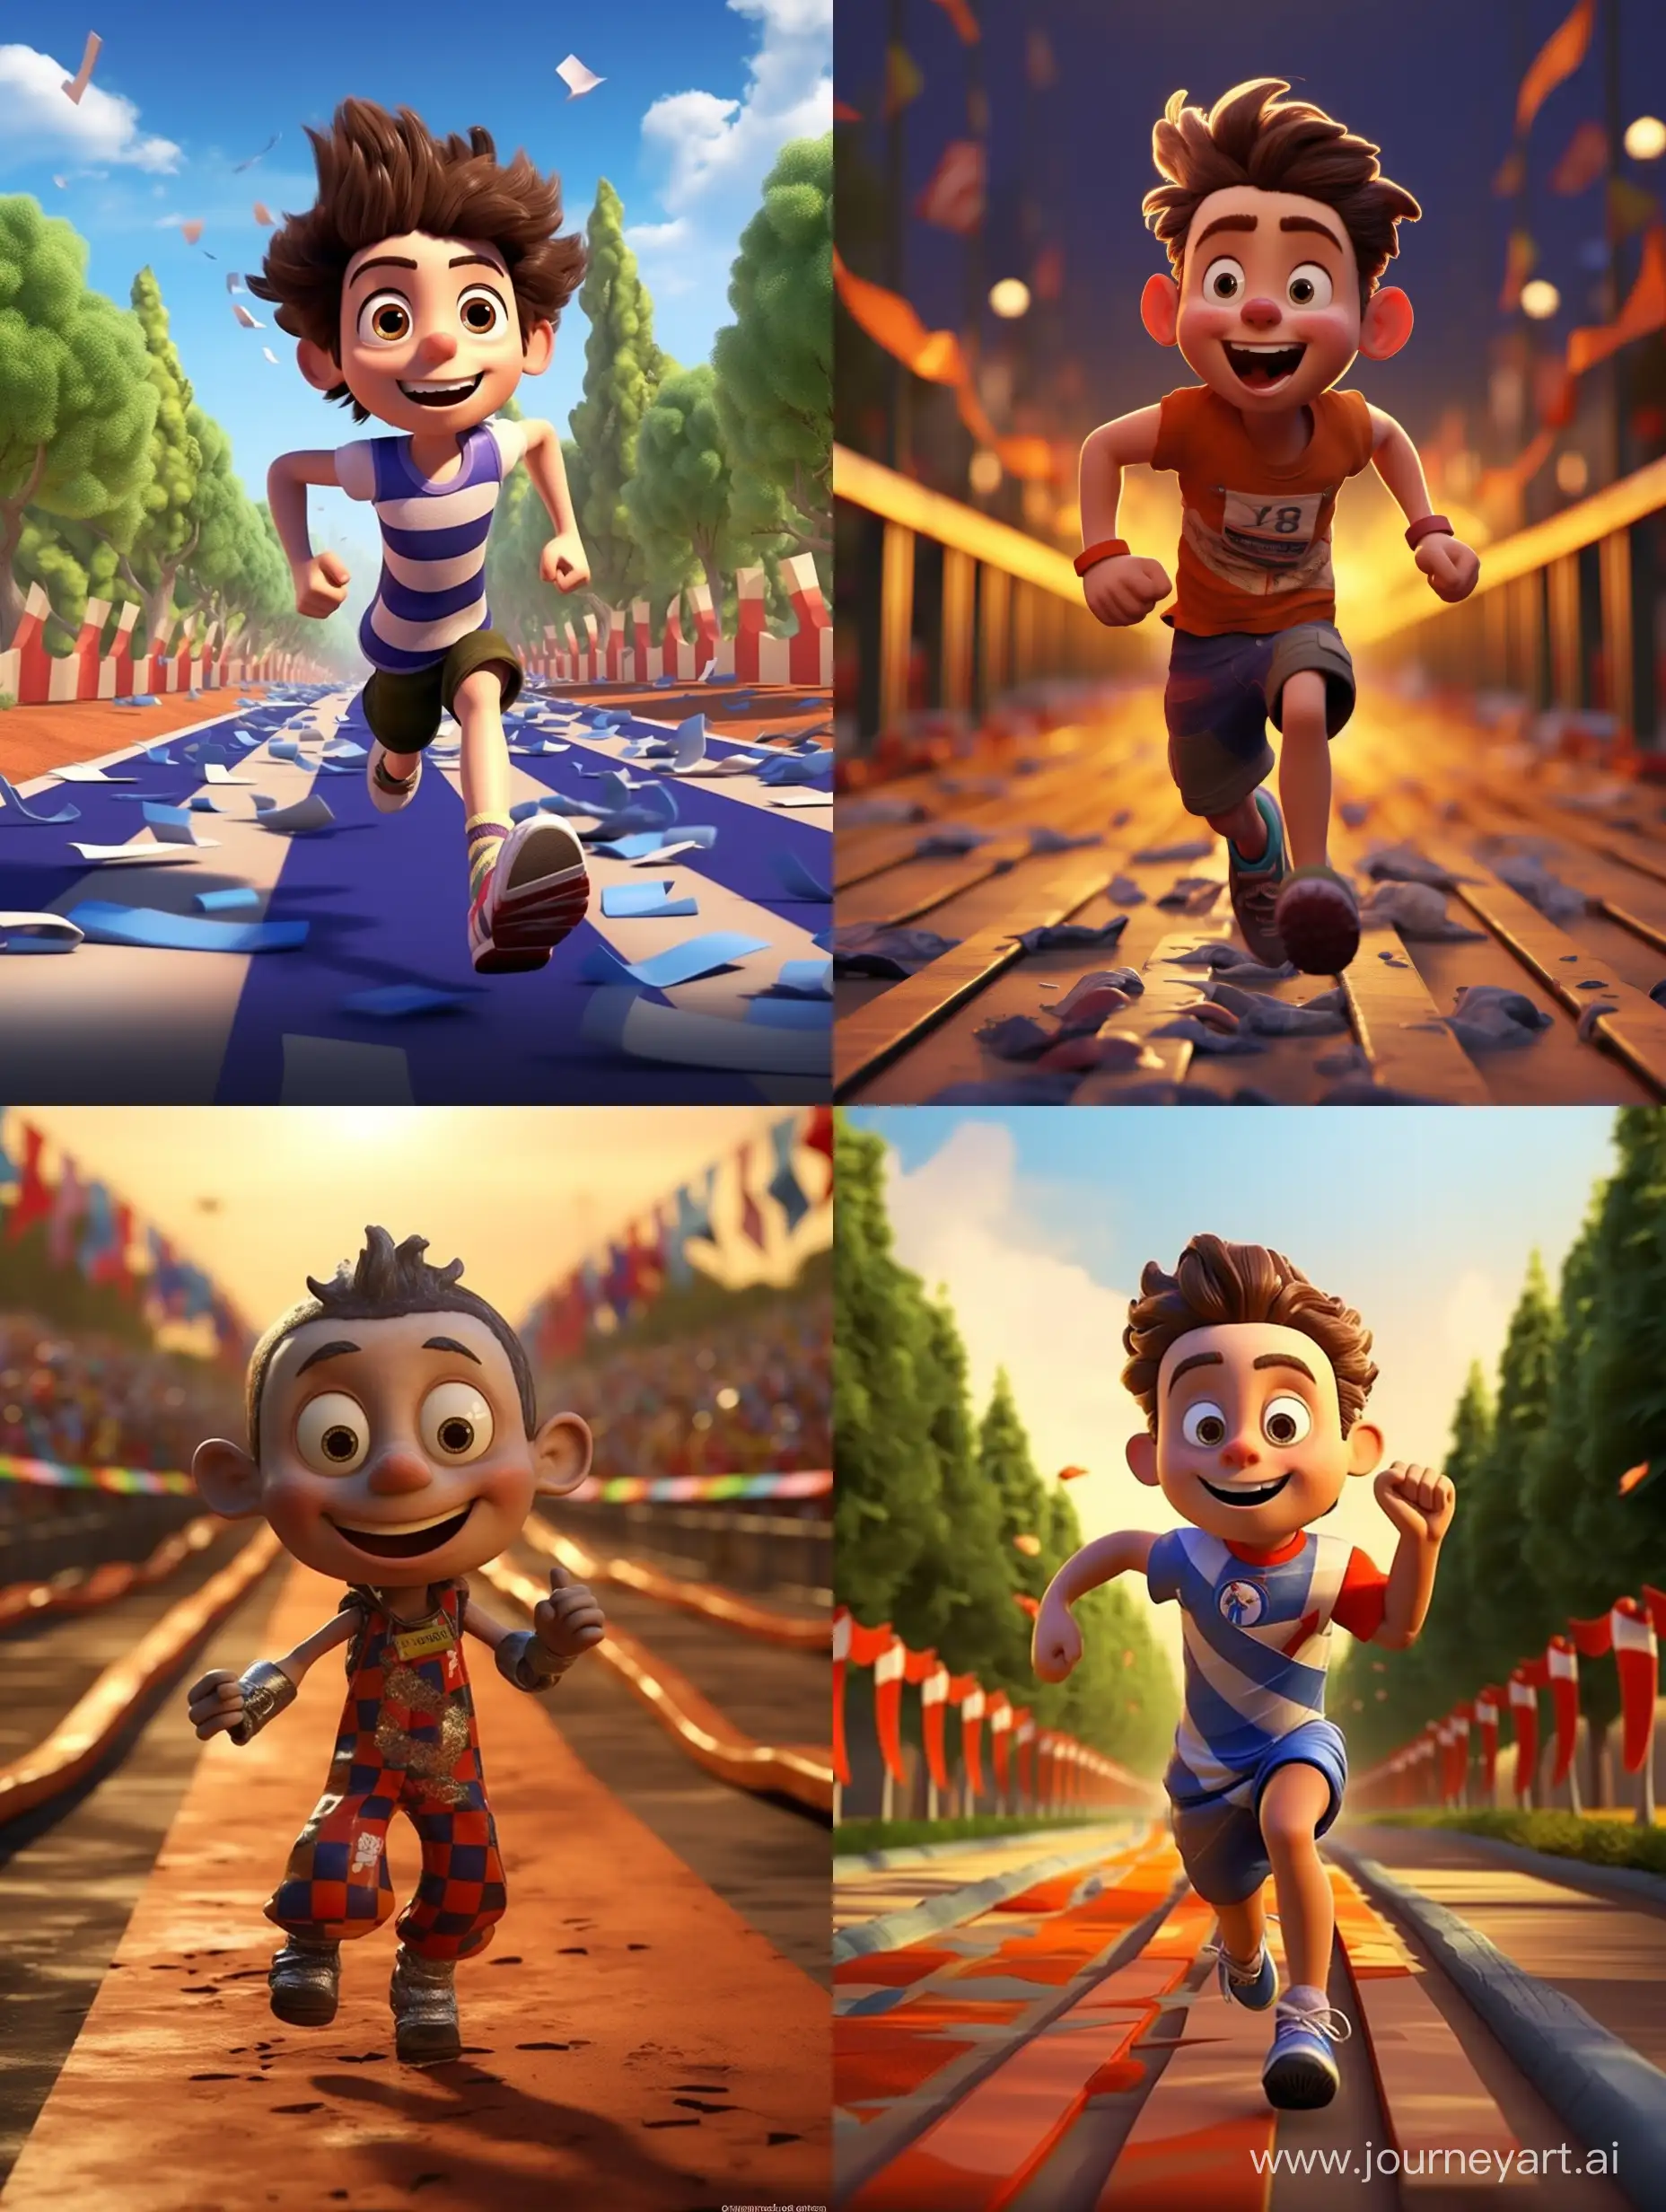 Endurance-Runner-Triumphs-in-PixarStyle-3D-Animation